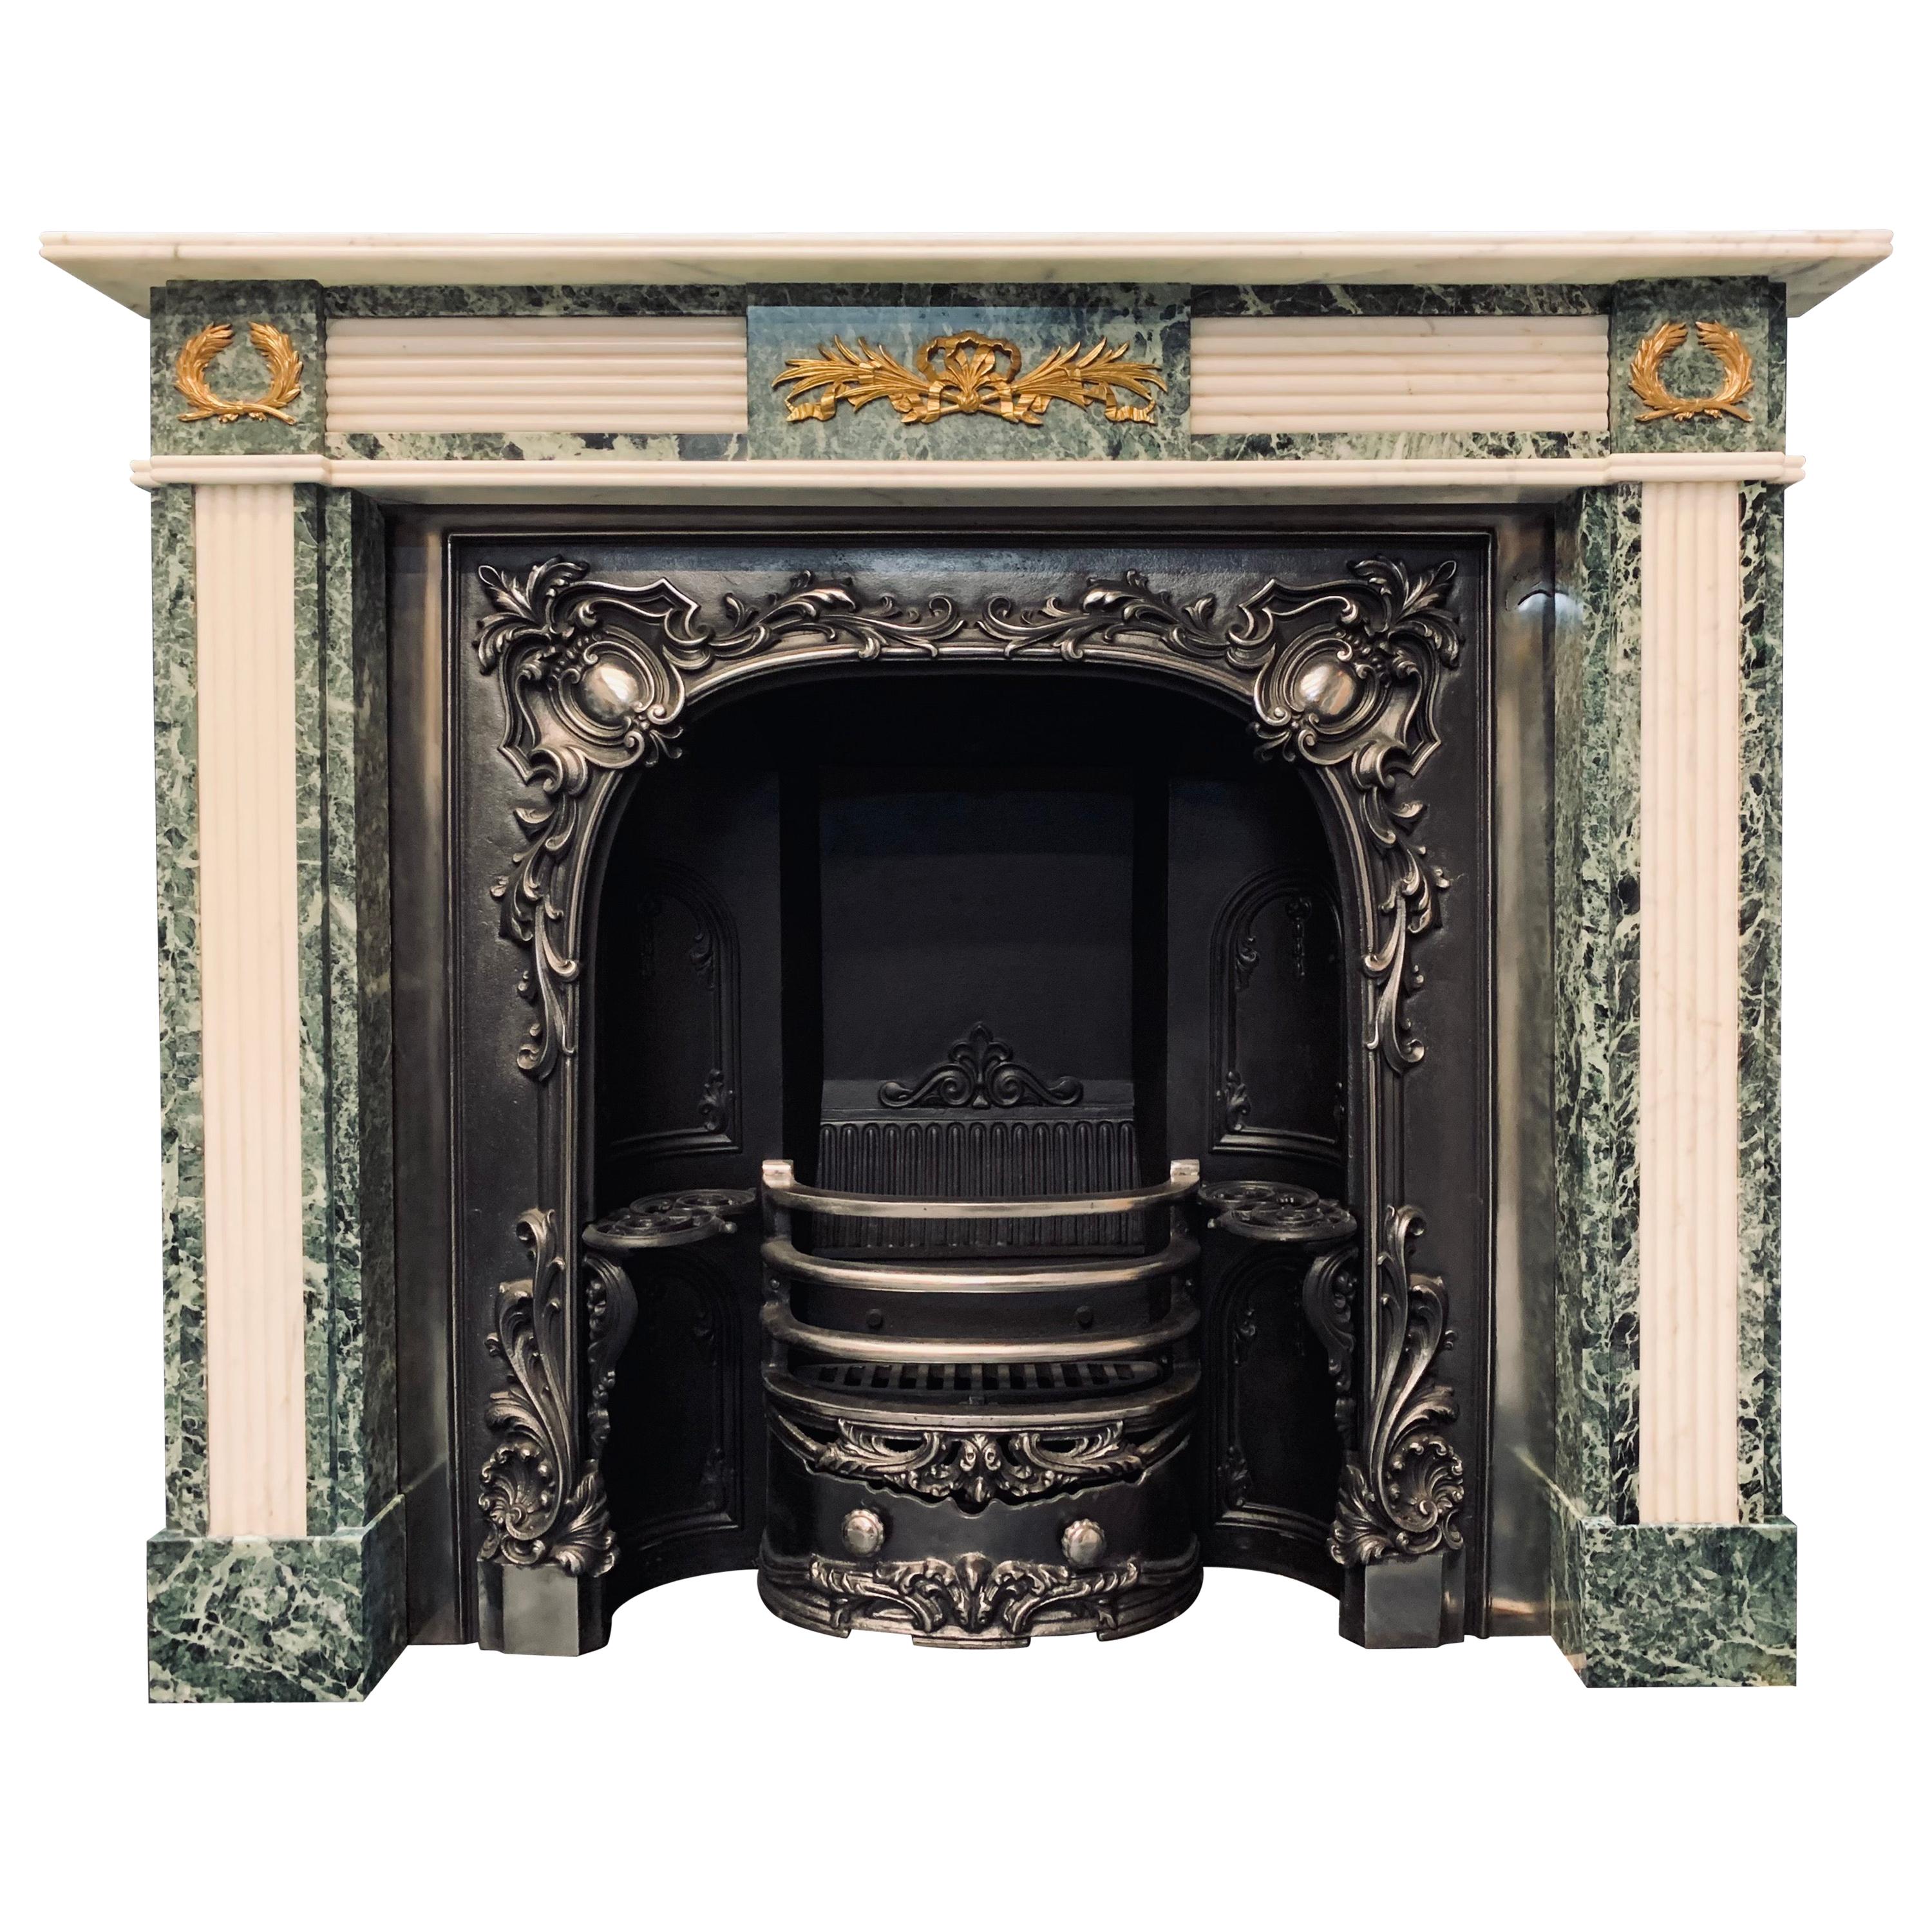 19th C Regency Style Verde Tinos Marble Fireplace Surround with Ormolu Mounts For Sale